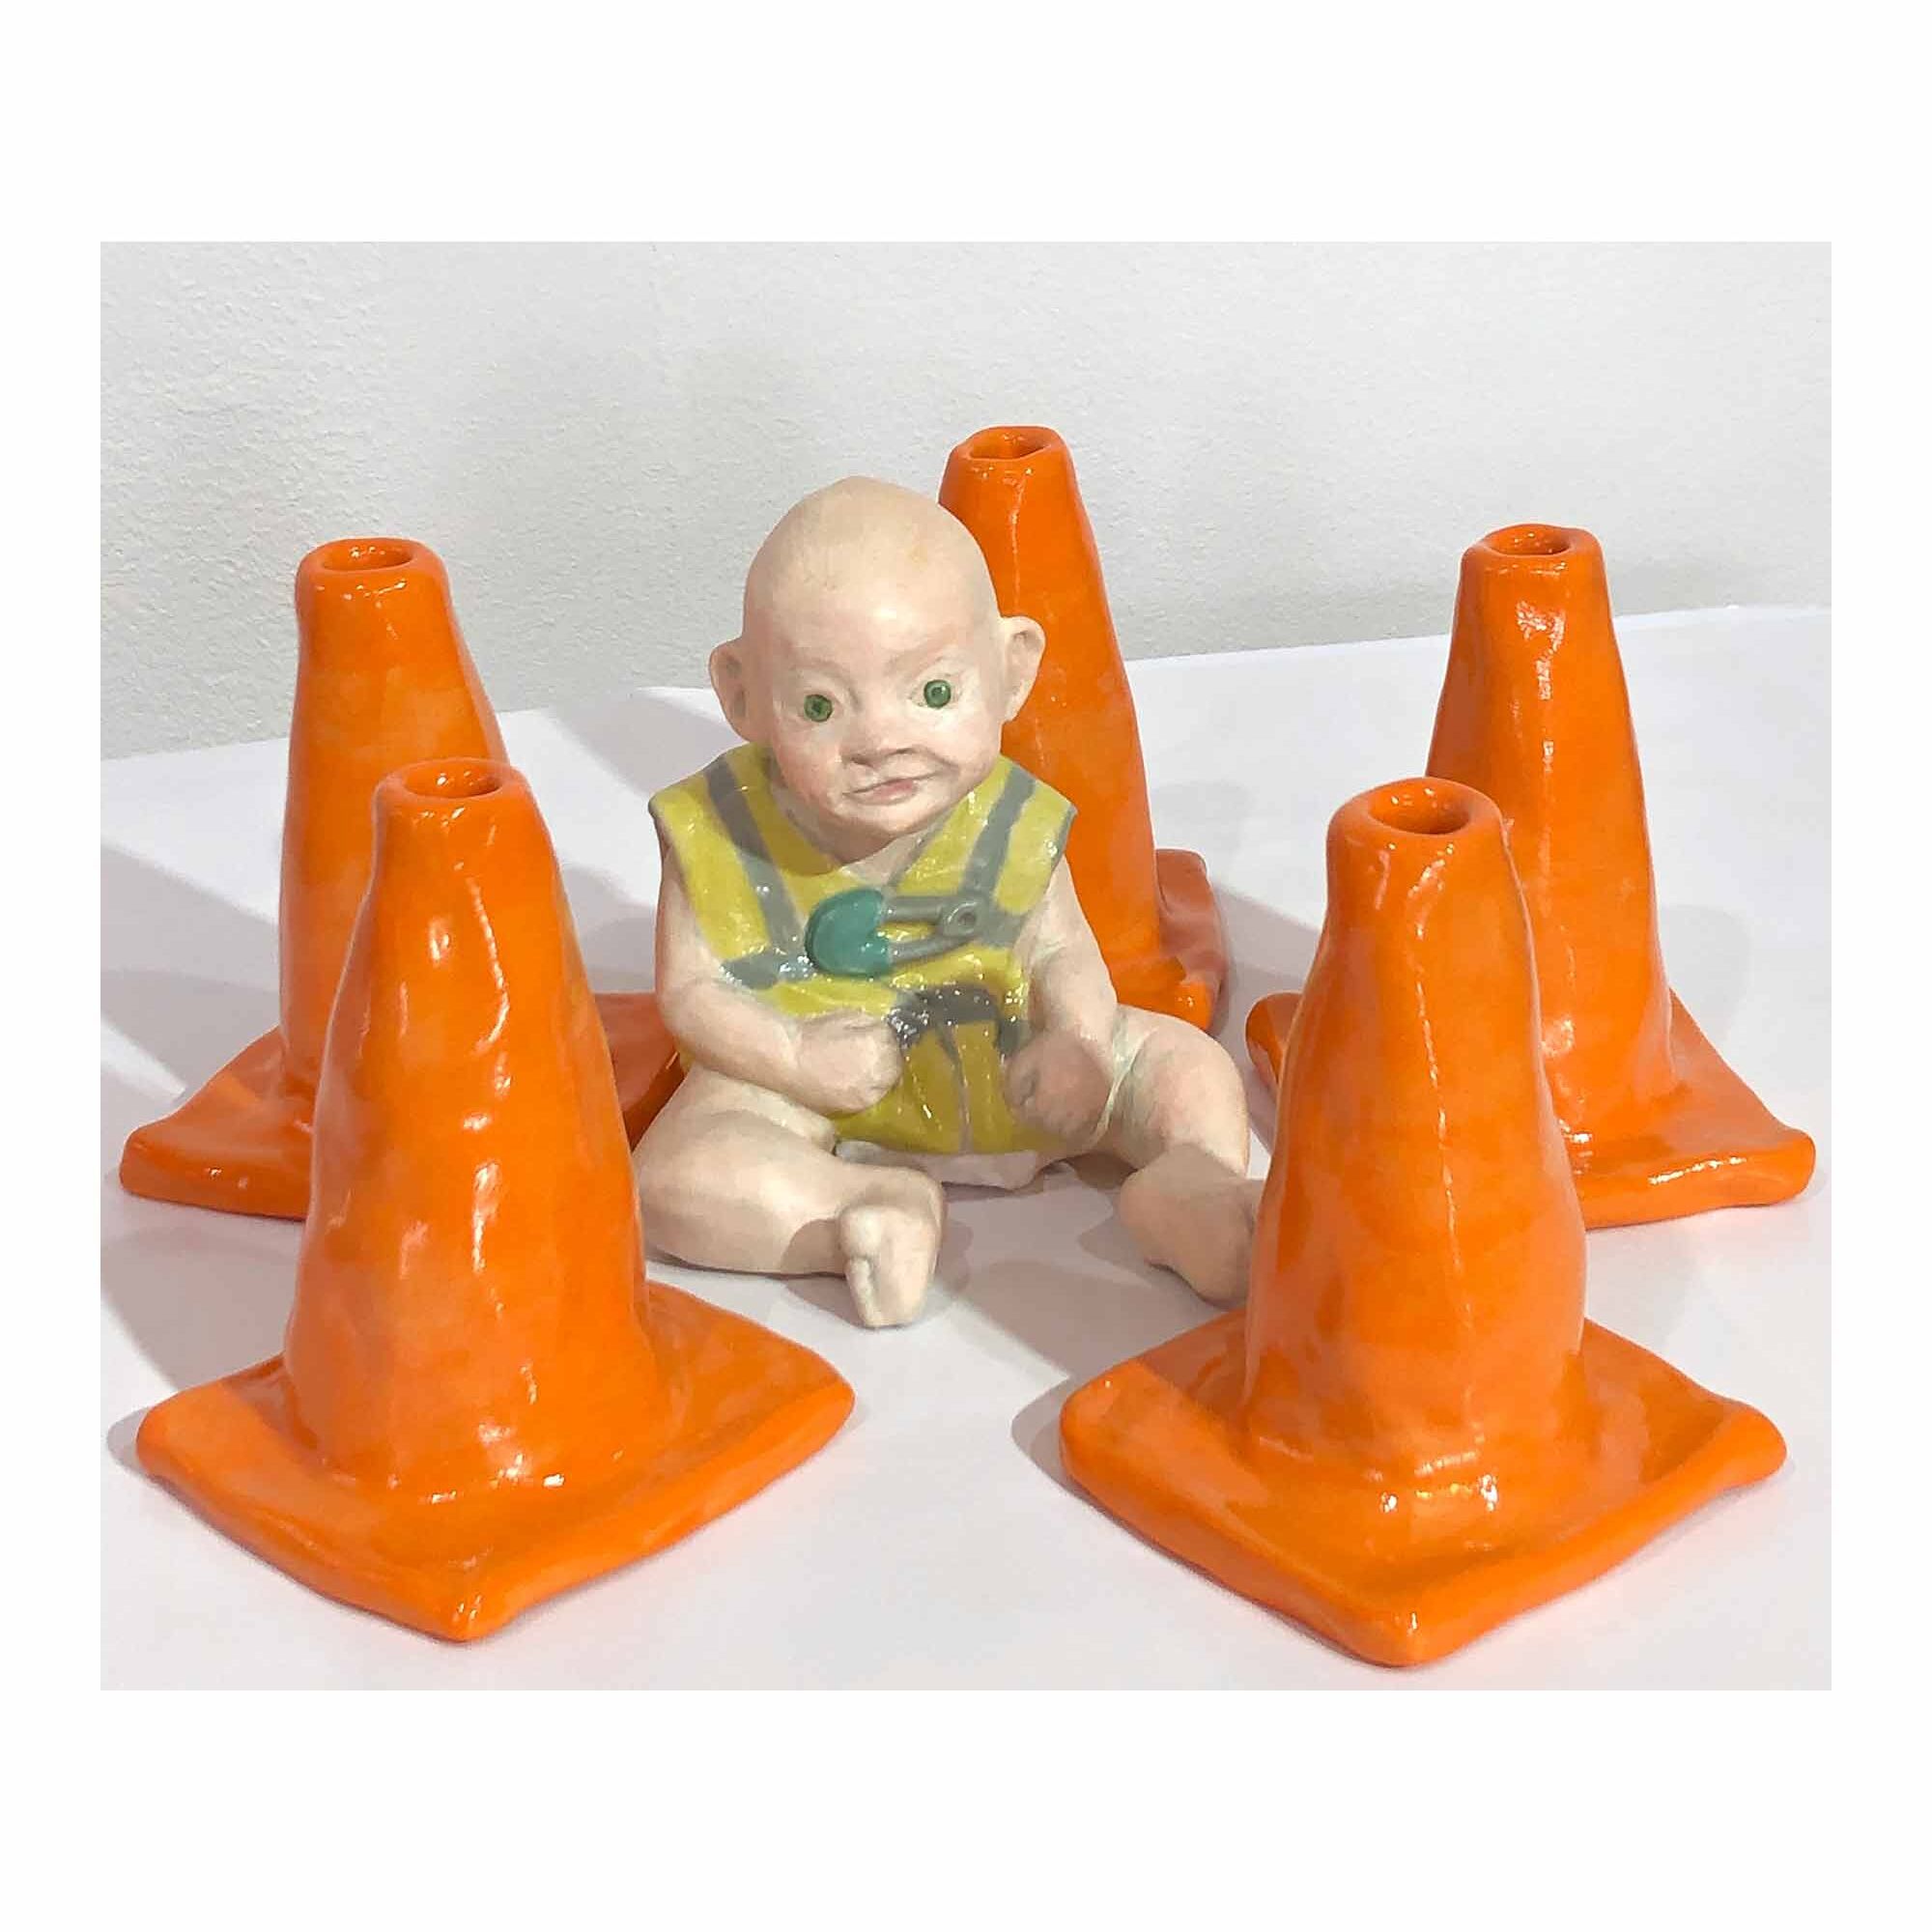 Cones-of-Safety-5#1.jpg